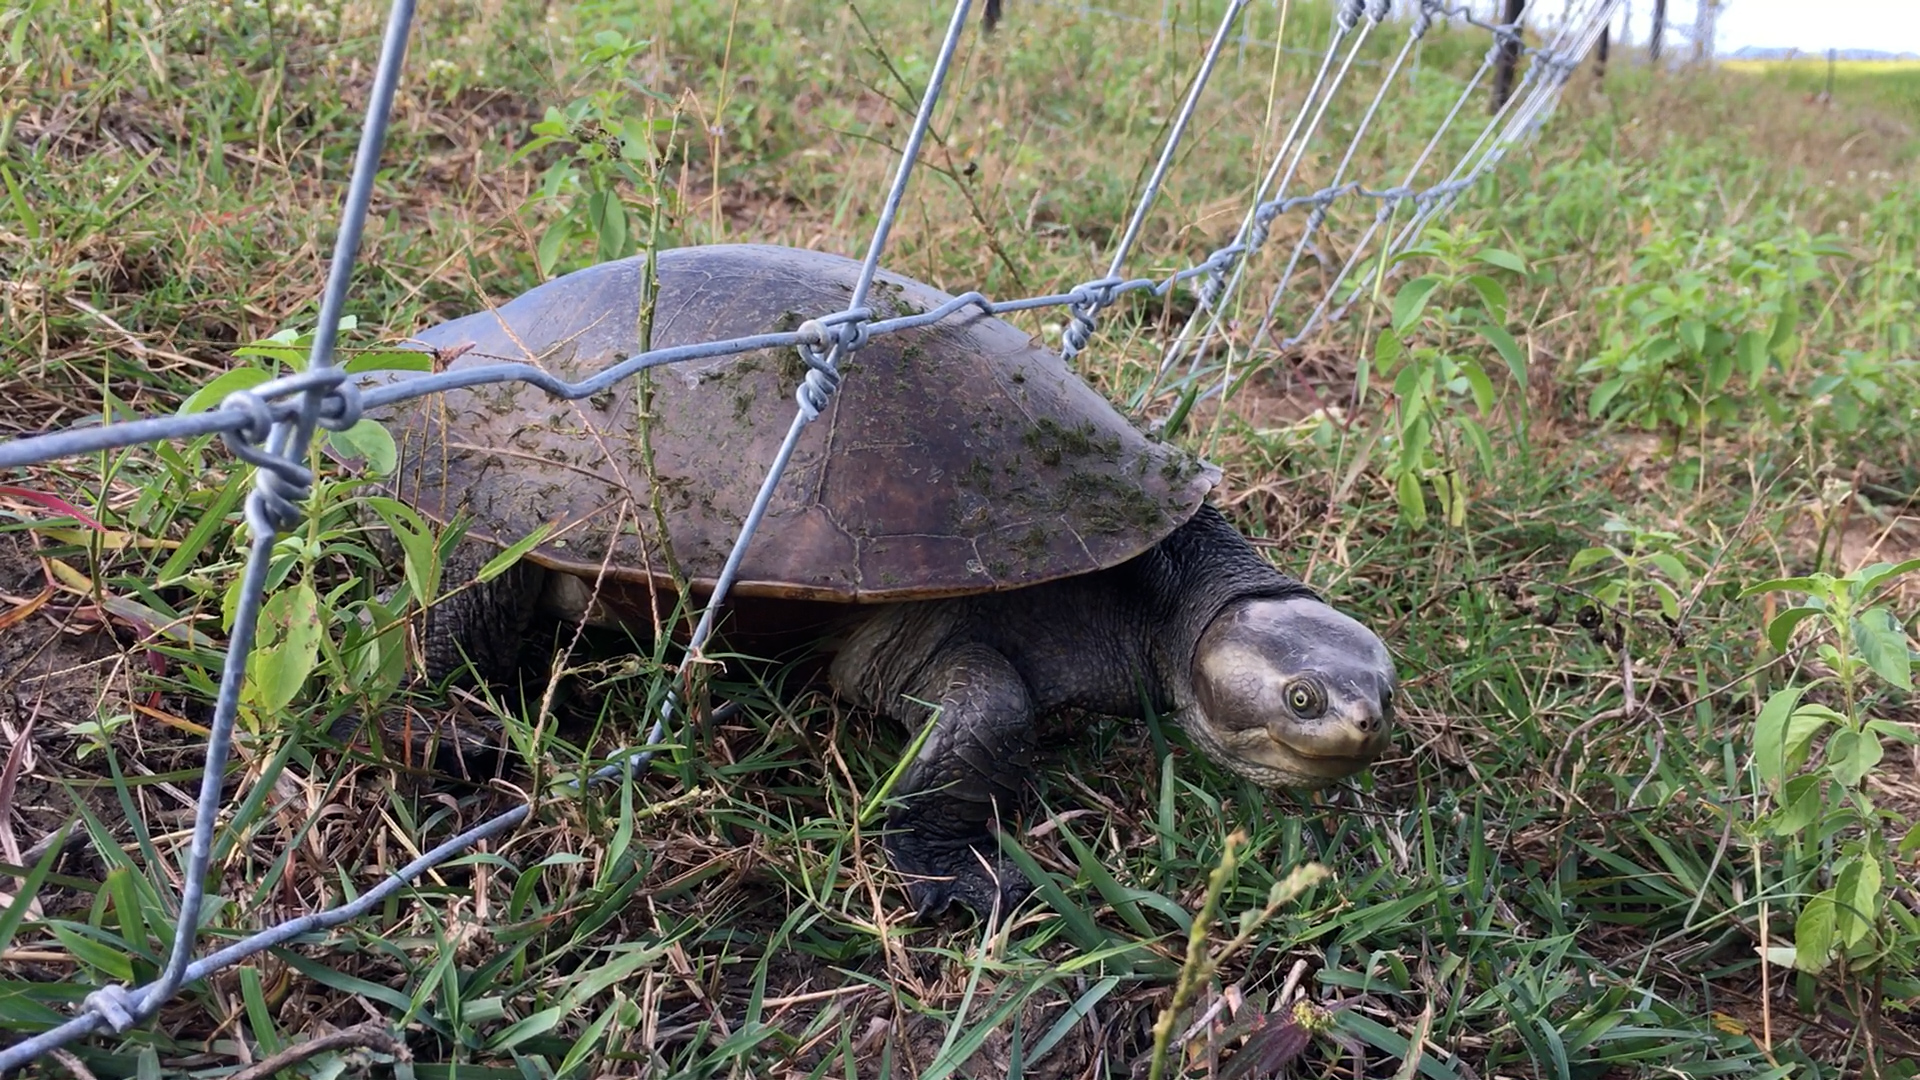 A freshwater turtle is unable to get through a wire fence designed to keep feral pigs out of wetlands.